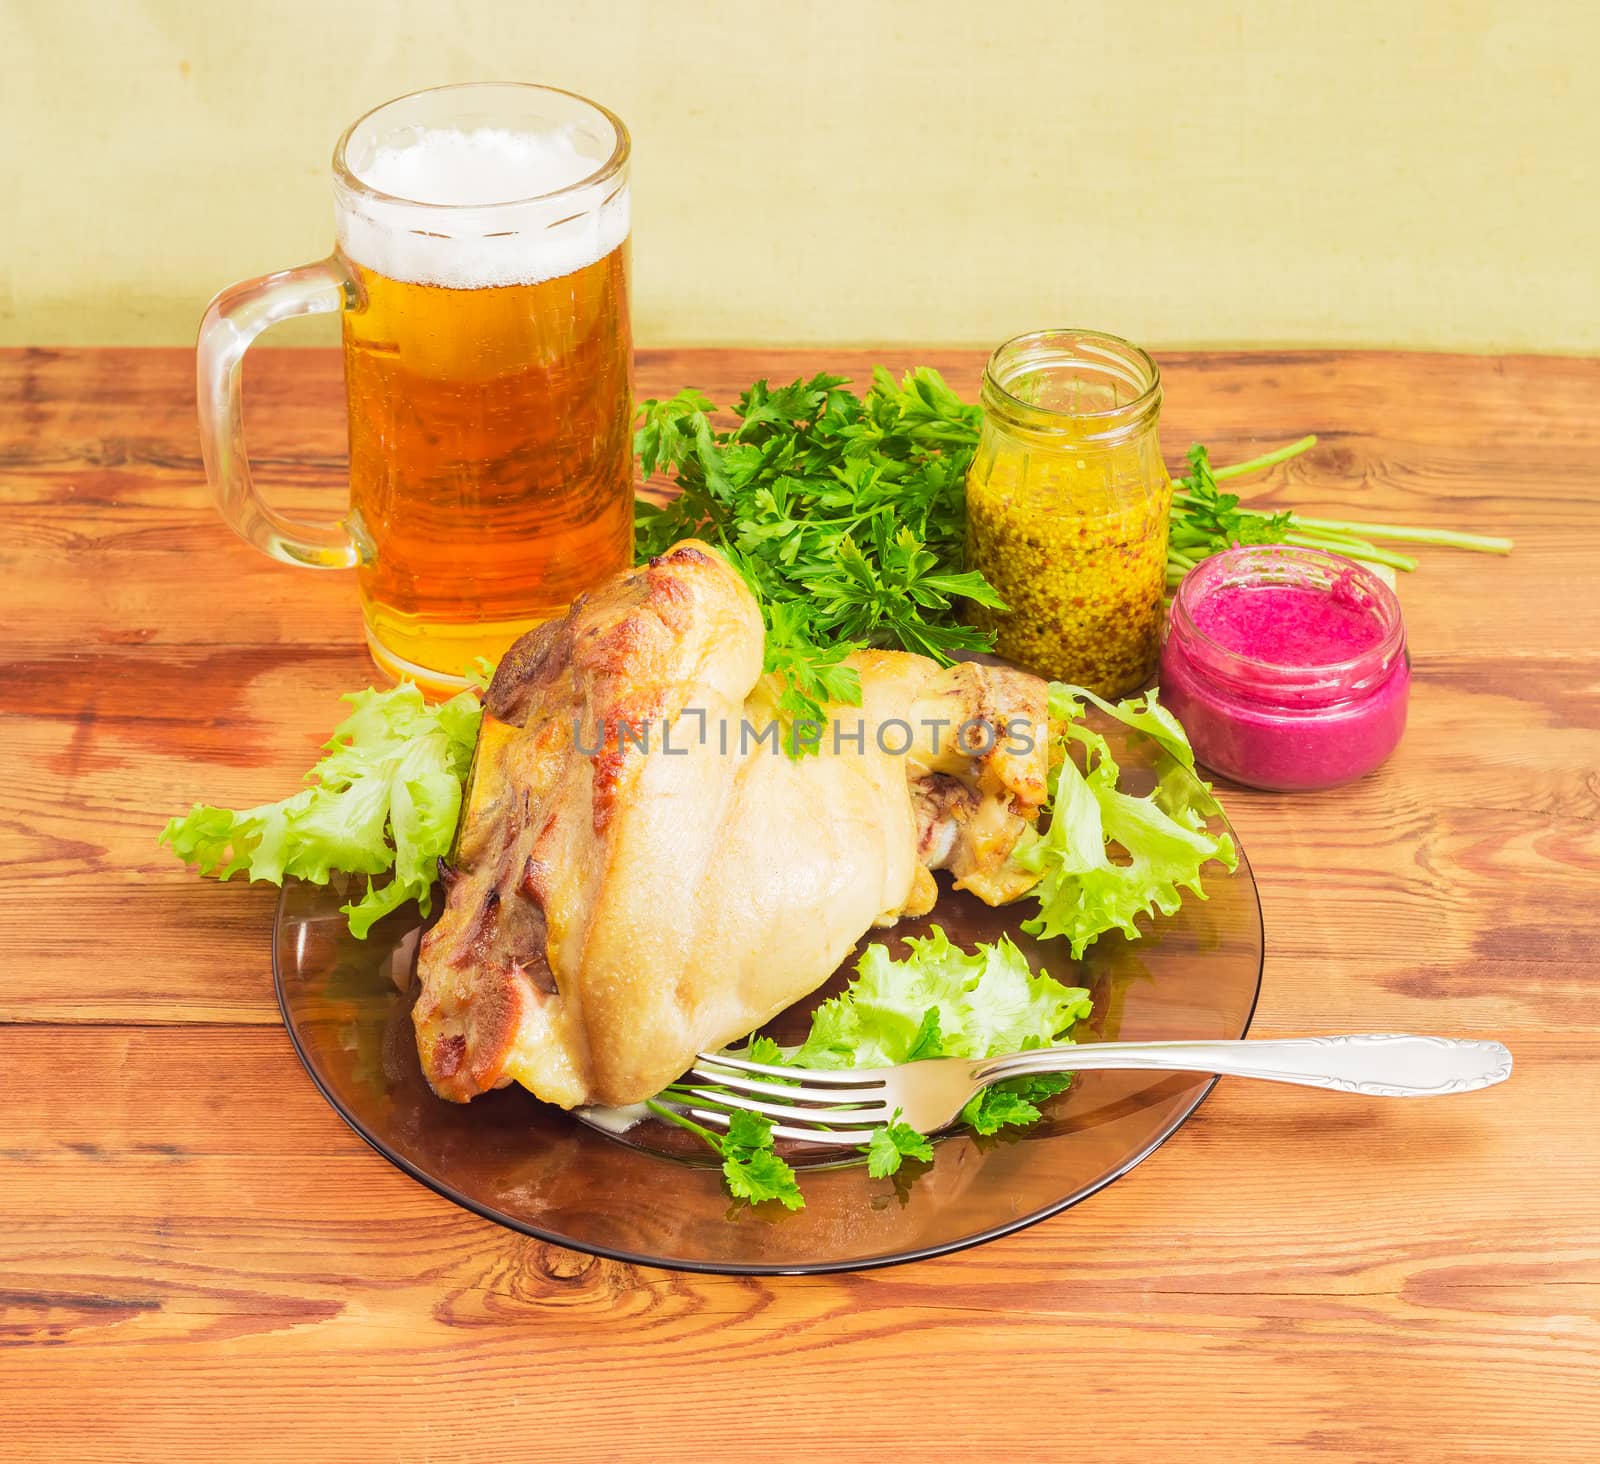 Baked ham hock with lettuce and parsley on a glass dish, glass of lager beer, beet horseradish sauce, French mustard, fork on an old wooden surface
